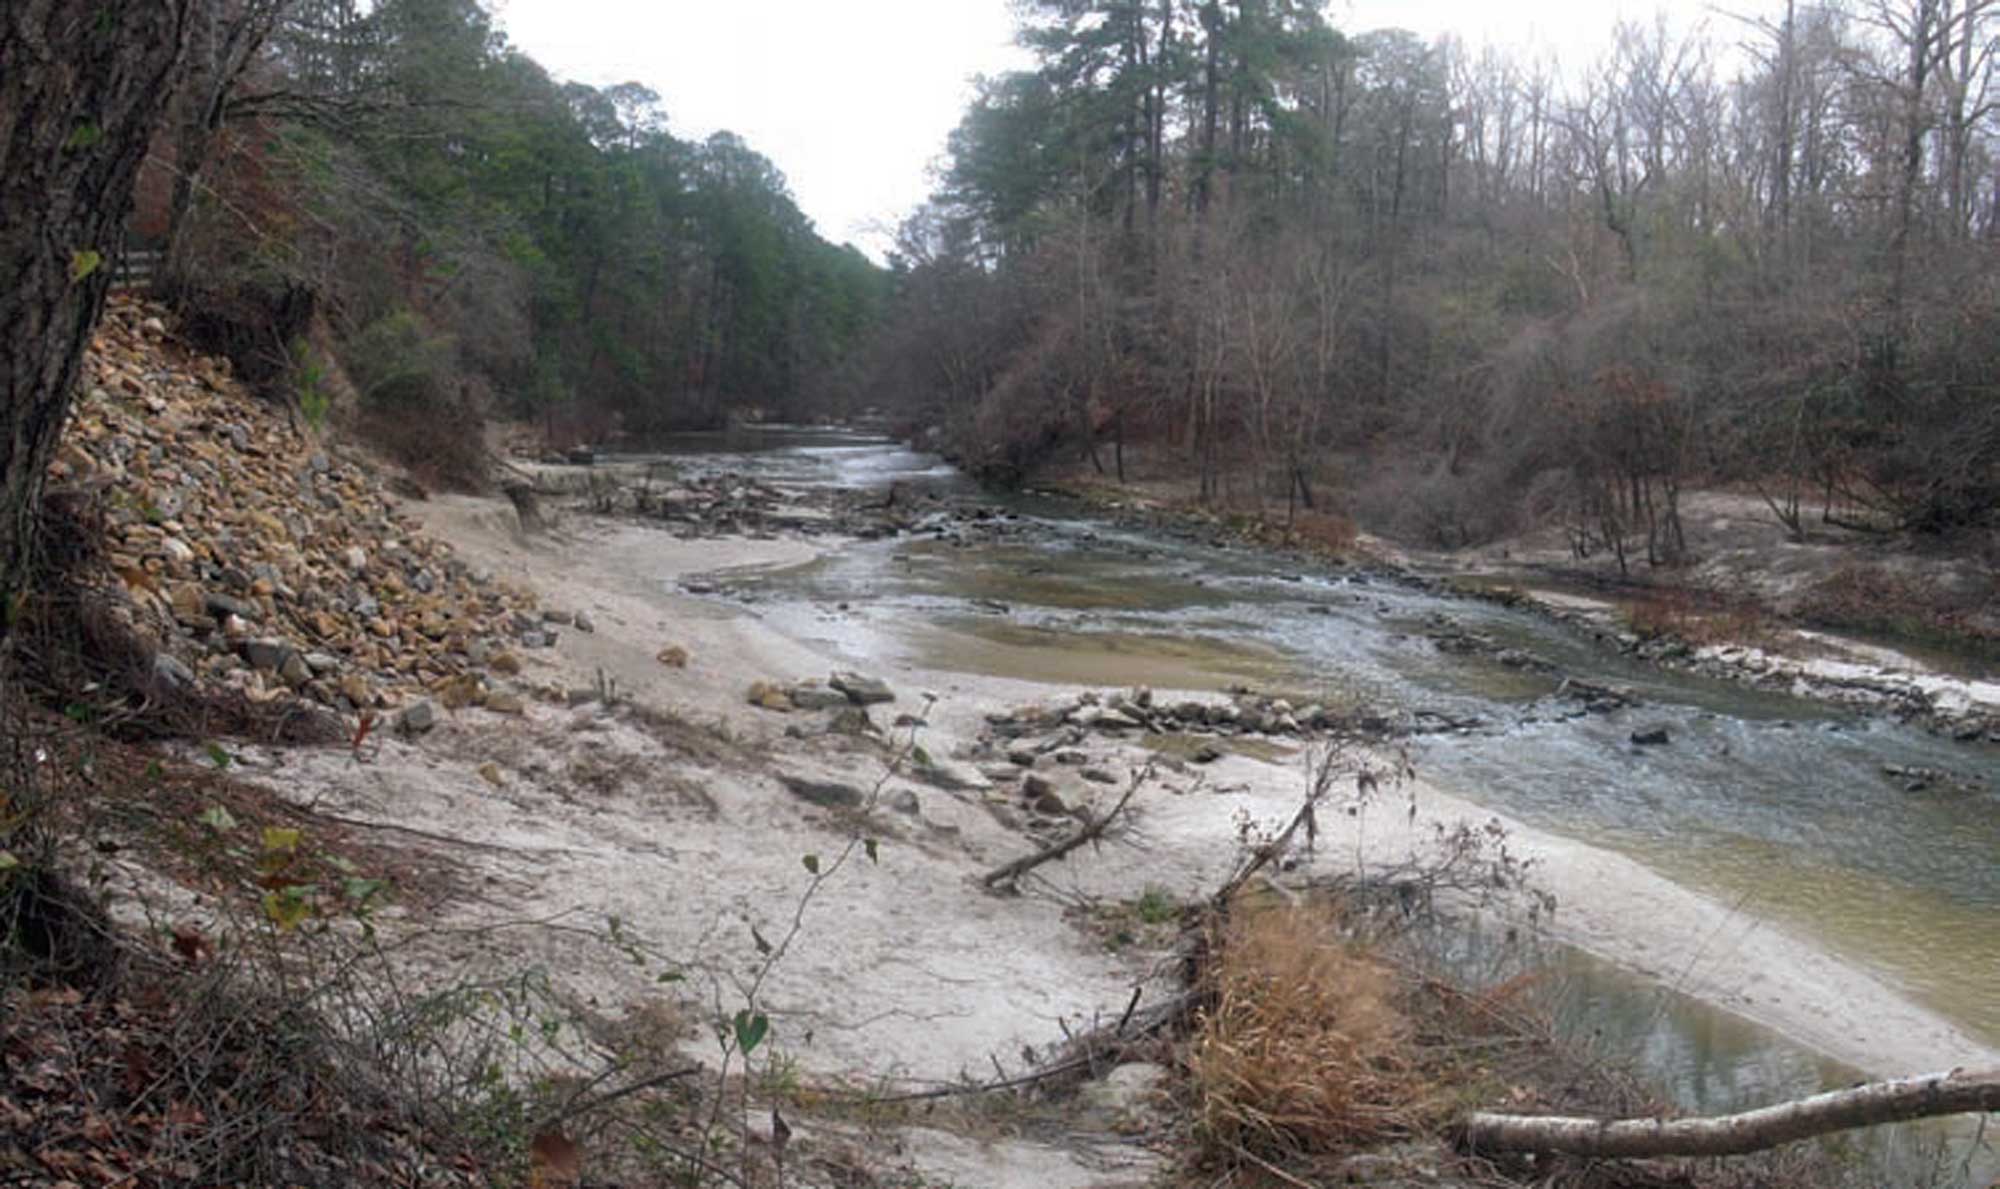 Photograph of a river cutting through sedimentary rock in Kisatchie National Forest, Louisiana.